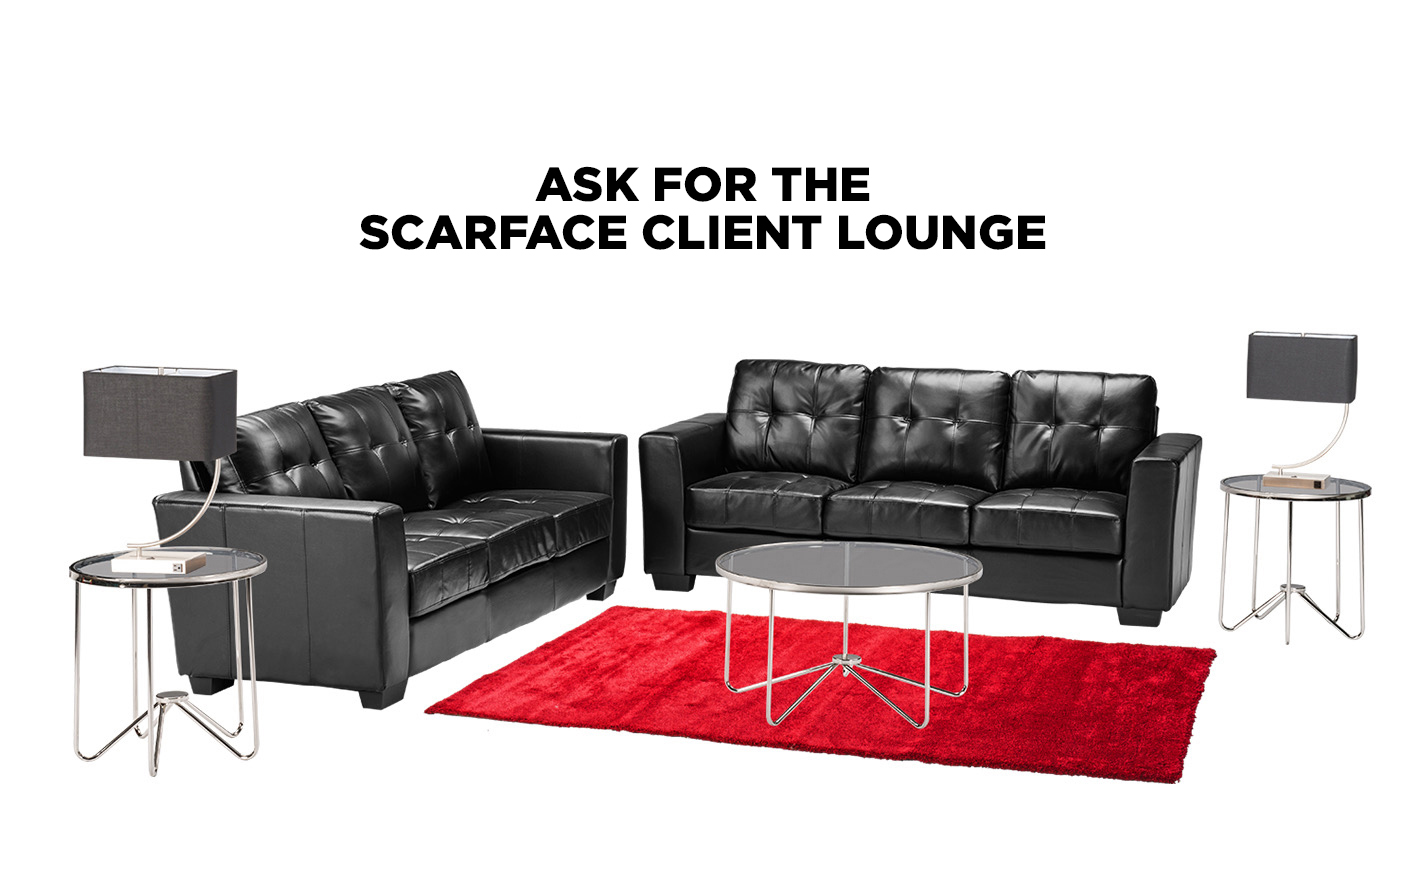 SCARFACE-CLIENT-LOUNGE